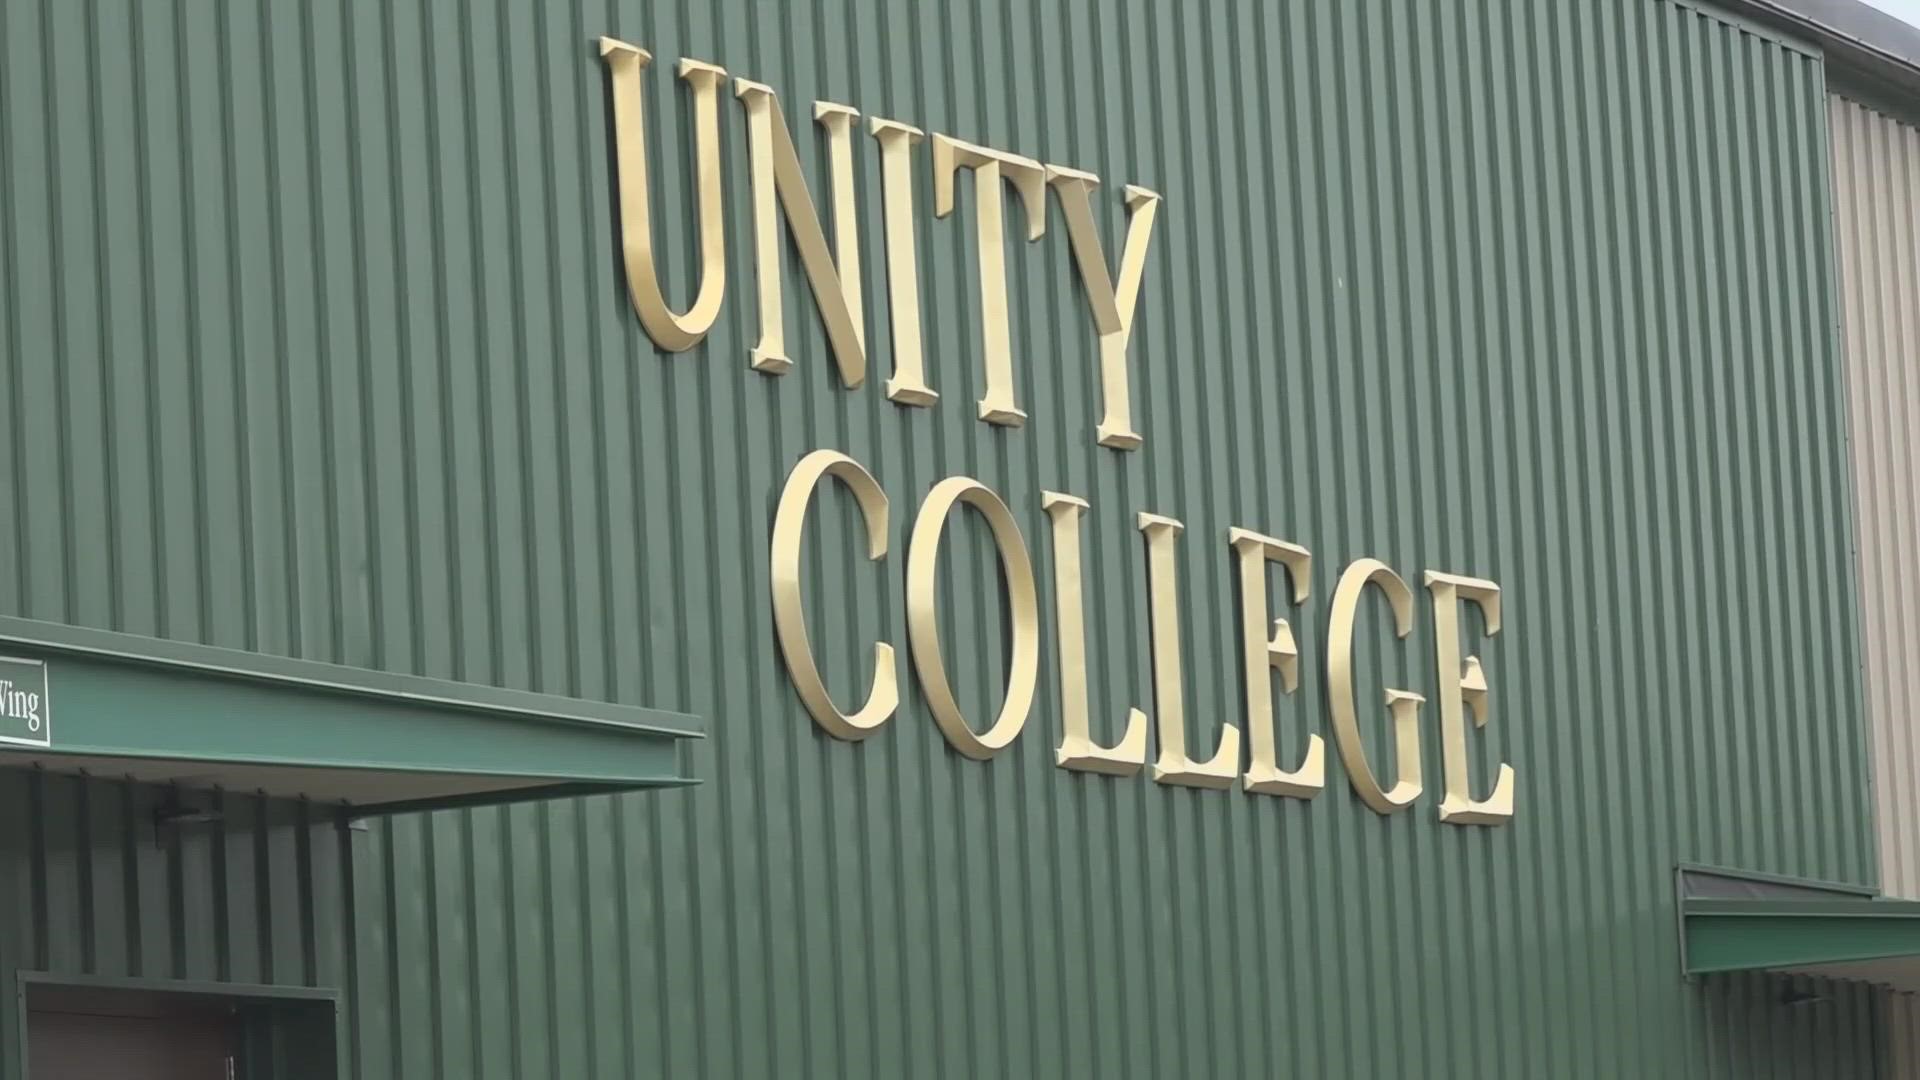 The college said Monday its name change has already been approved by the Maine Department of Education and the New England Commission of Higher Education.